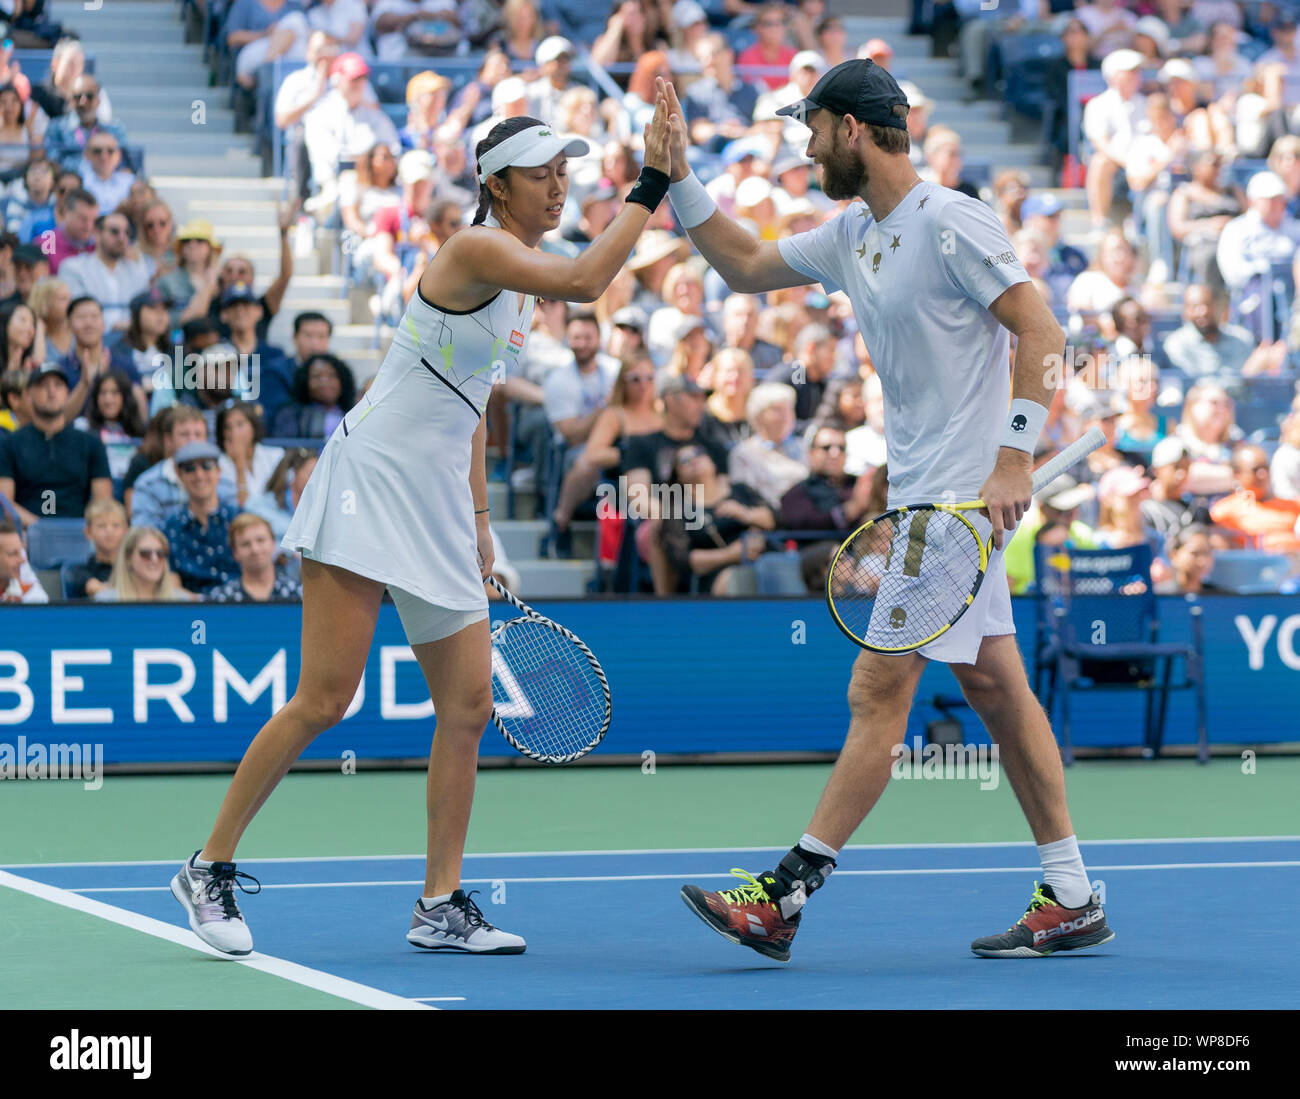 New York, NY - September 7, 2019: Hao-Ching Chan (Taipei), Michael Venus (New Zeland) in action during mixed doubles final match at US Open Championships at Billie Jean King National Tennis Center Stock Photo